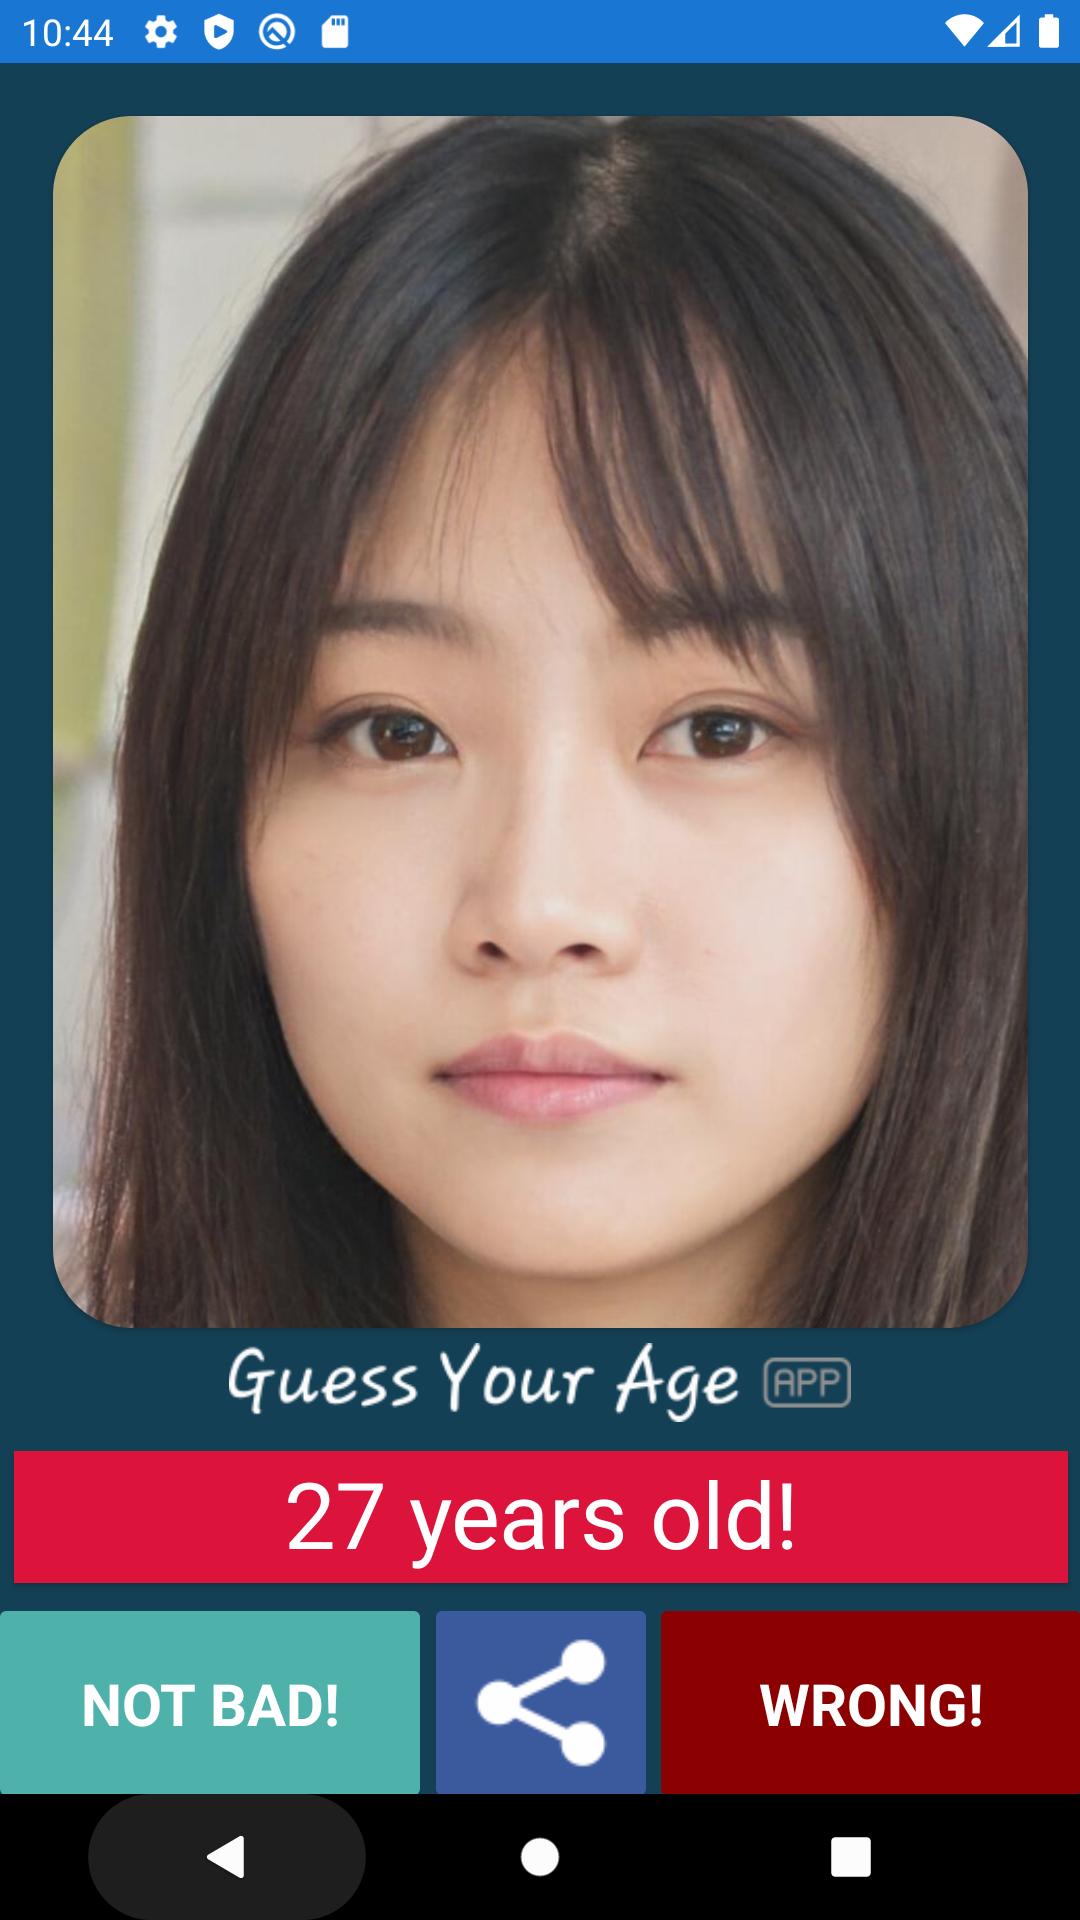 Guess Your Age for Android - APK Download